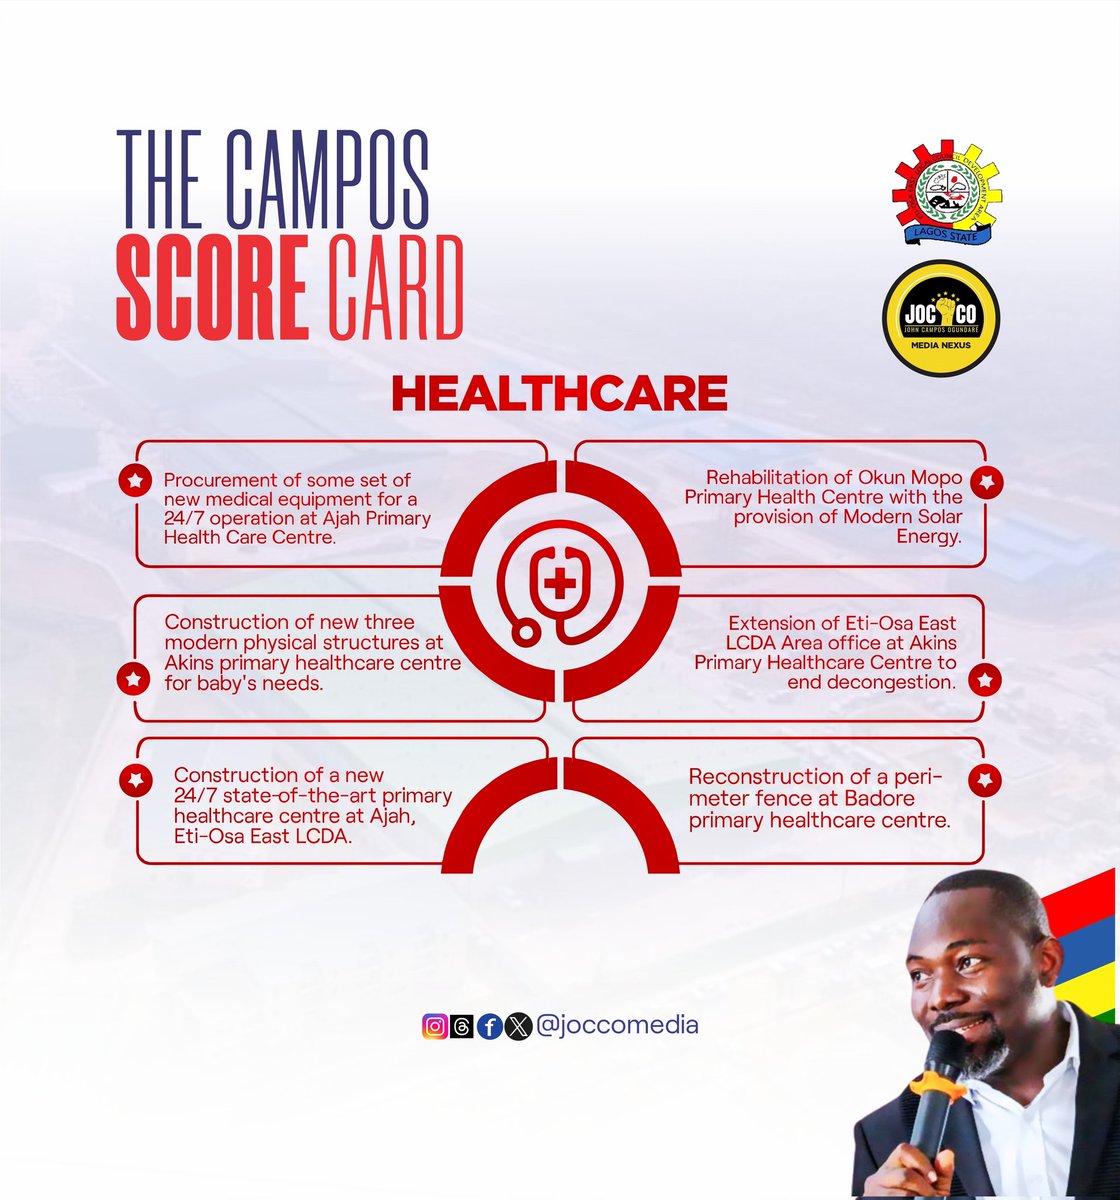 THE CAMPOS SCORECARD

Attached is a flyer of what Eti-Osa East has done as it relates to HEALTH under the leadership of Hon. John Ogundare Campos. 

Watch out for more! 

#healthcare
#evidencedey
#JoccoIsWorking 
#expectmore

Jocco Media Nexus